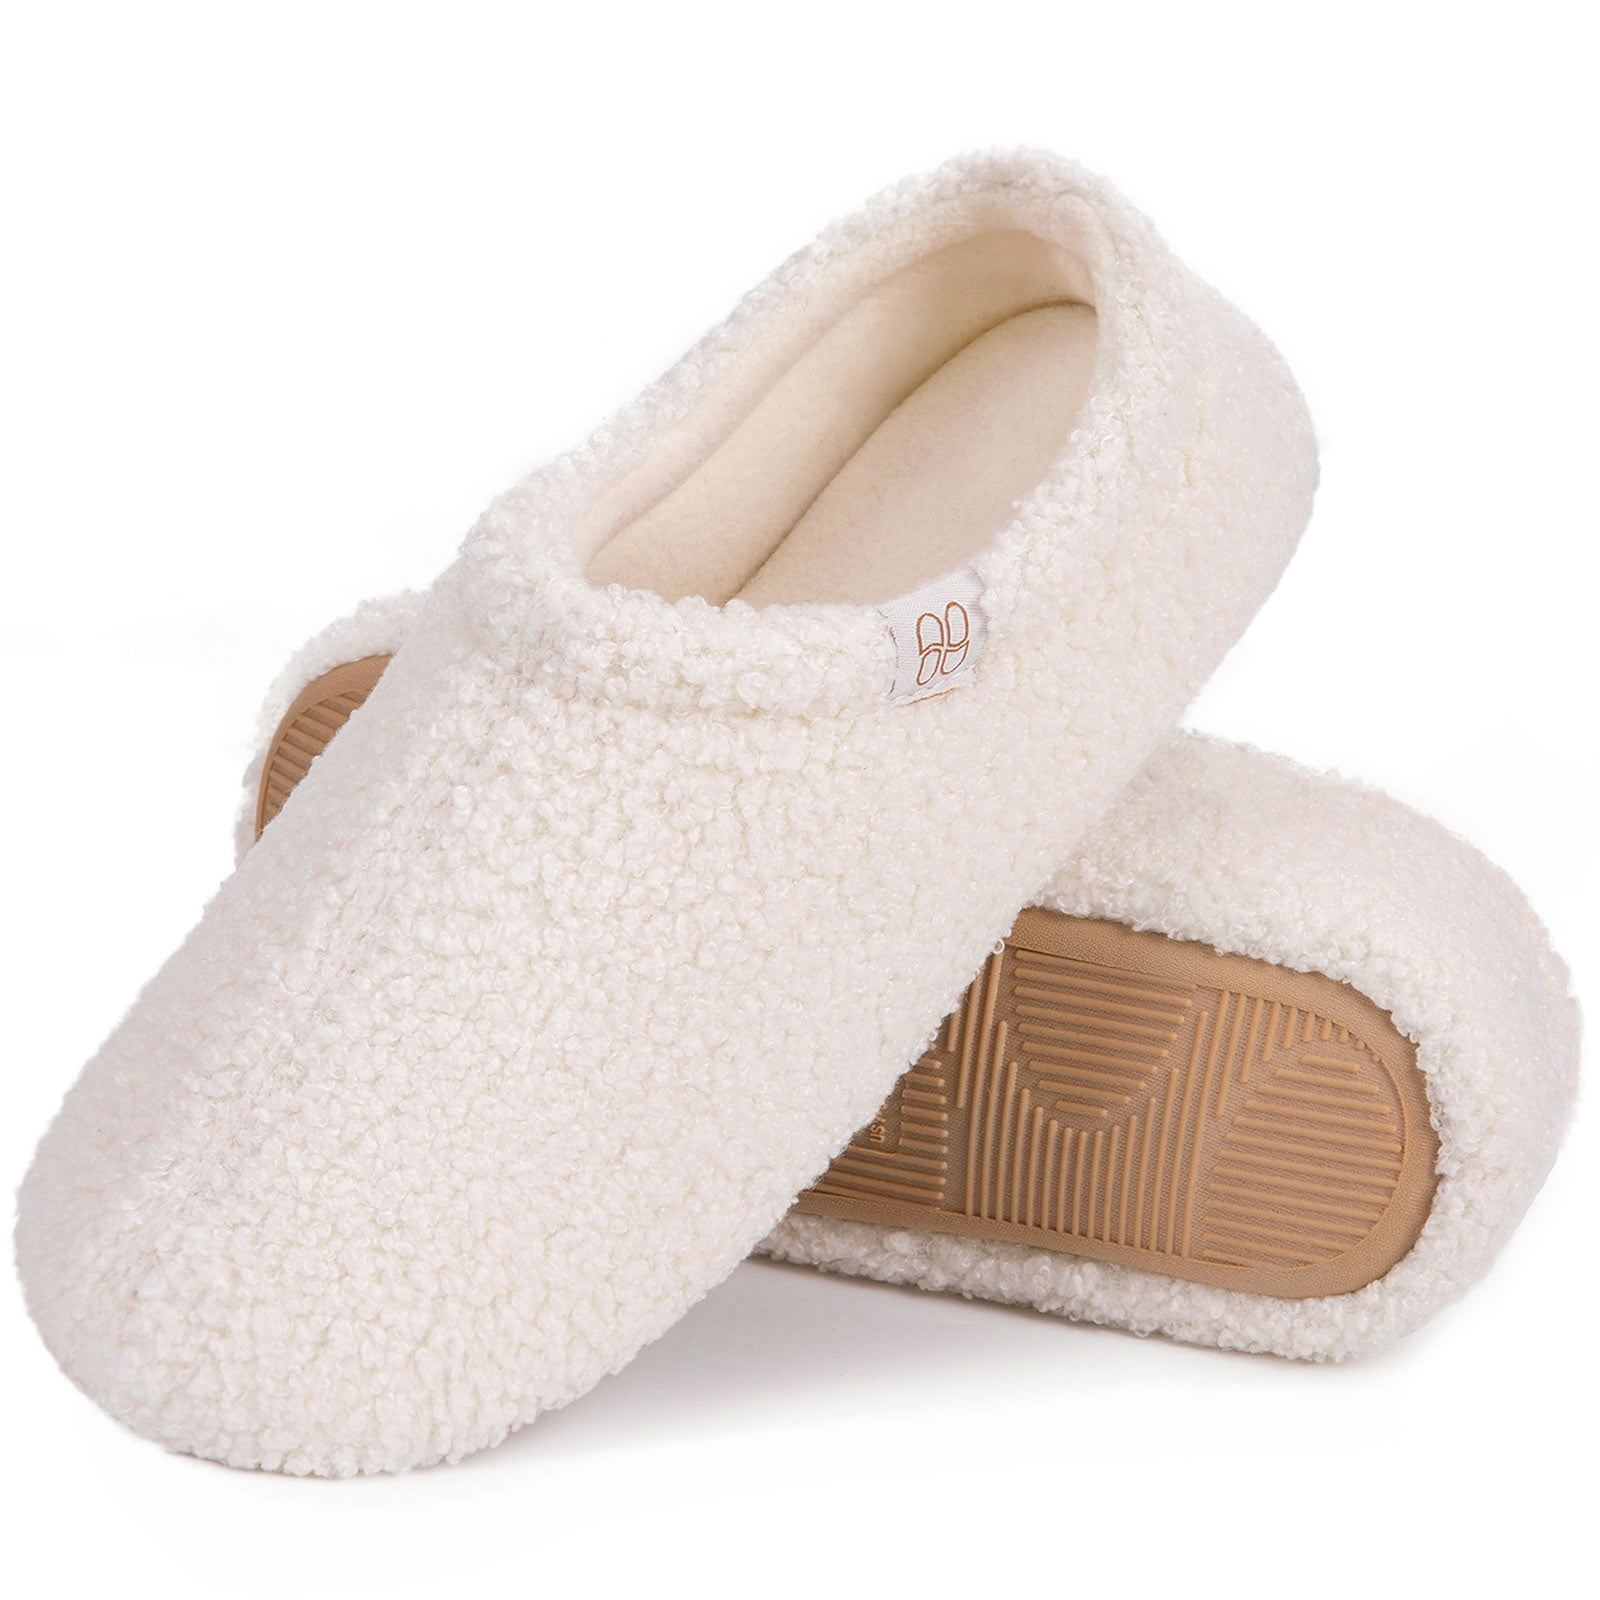 HomeTop Women's Fuzzy Curly Fur Memory Foam Loafer Slippers with Polar ...